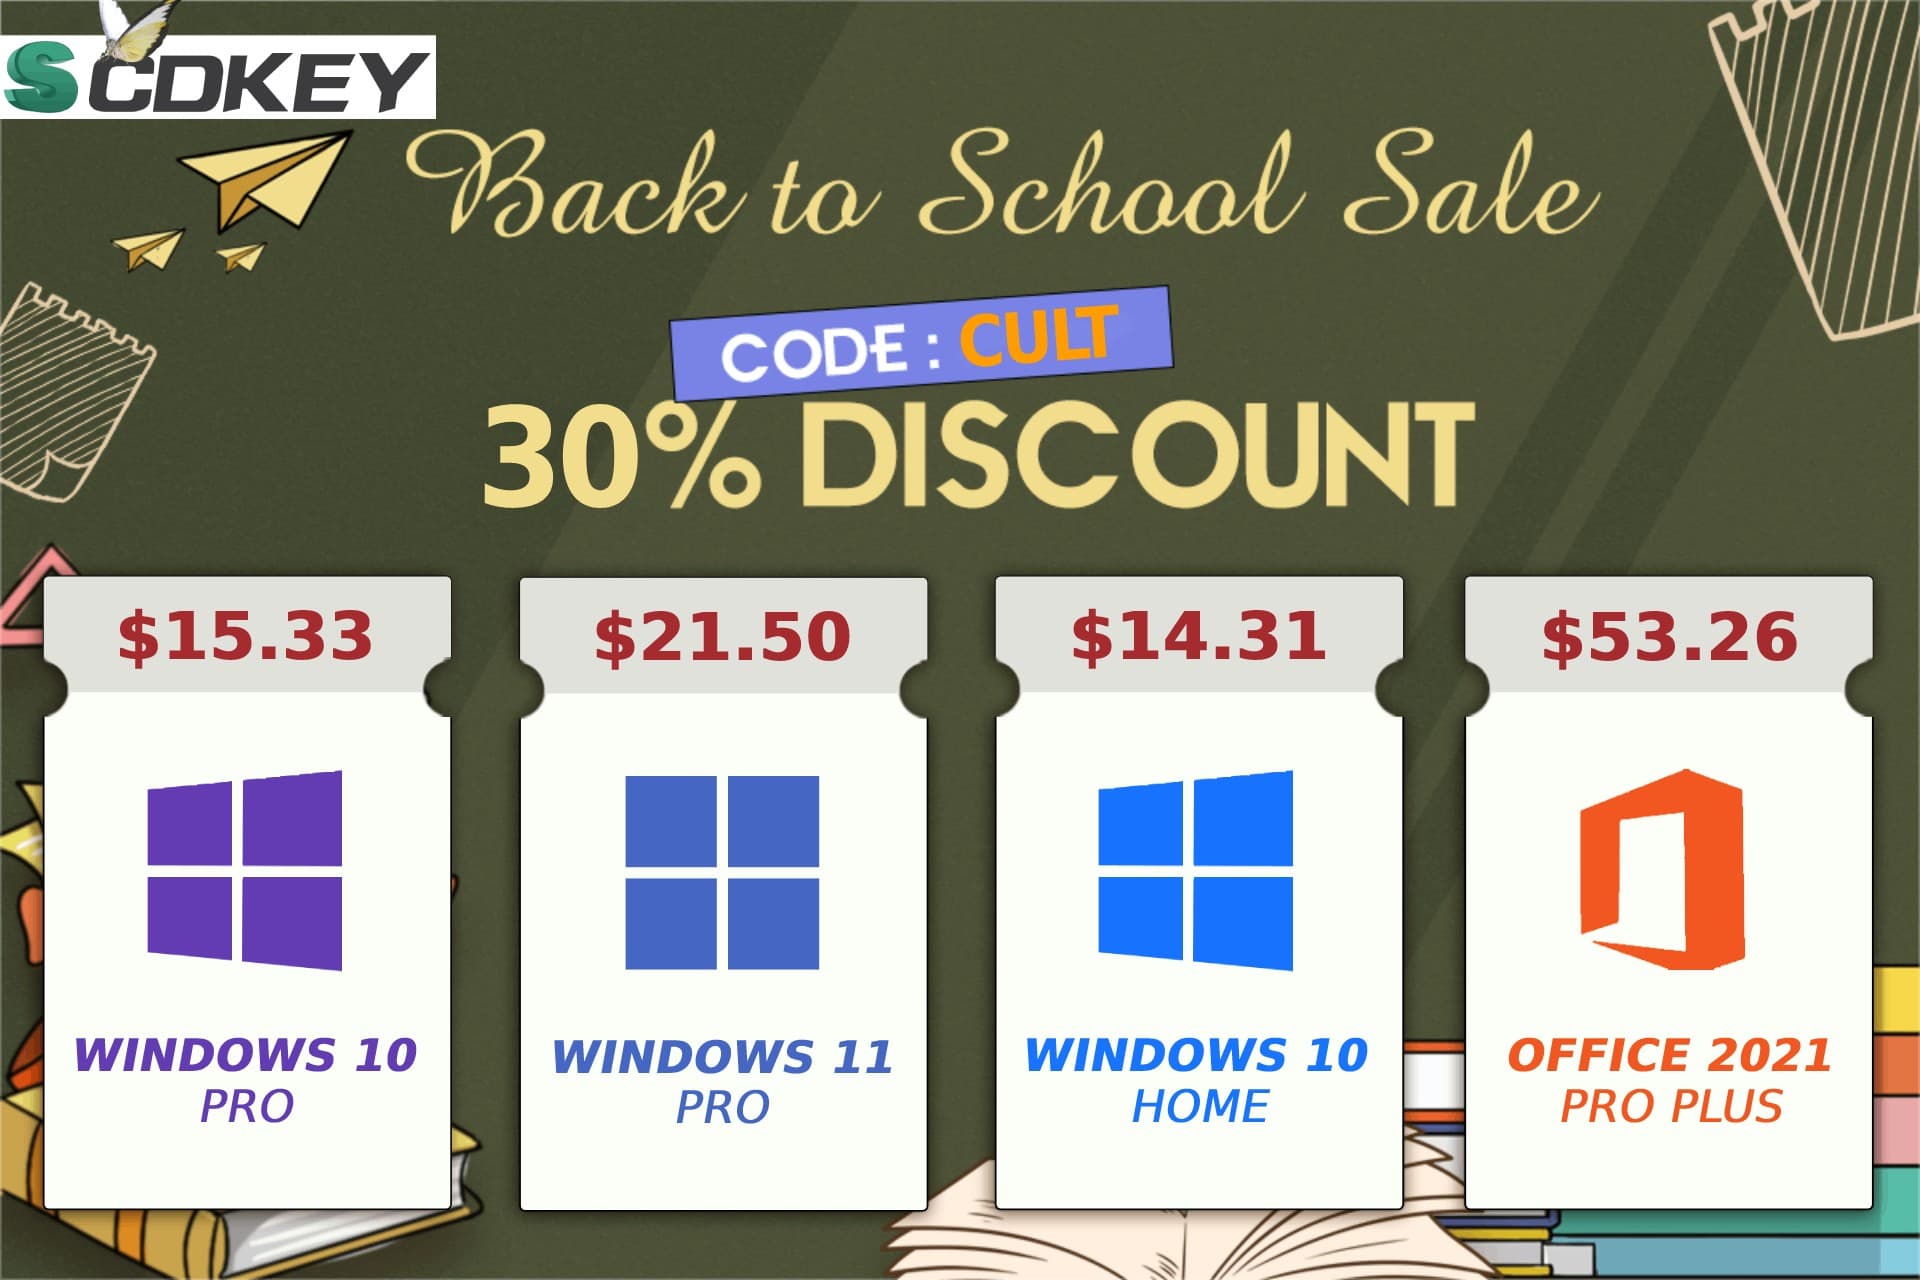 Grab back-to-school with savings on genuine Microsoft software. Just head to SCDKey.com using these links. And don’t forget to enter promo code CULT to get extra savings.